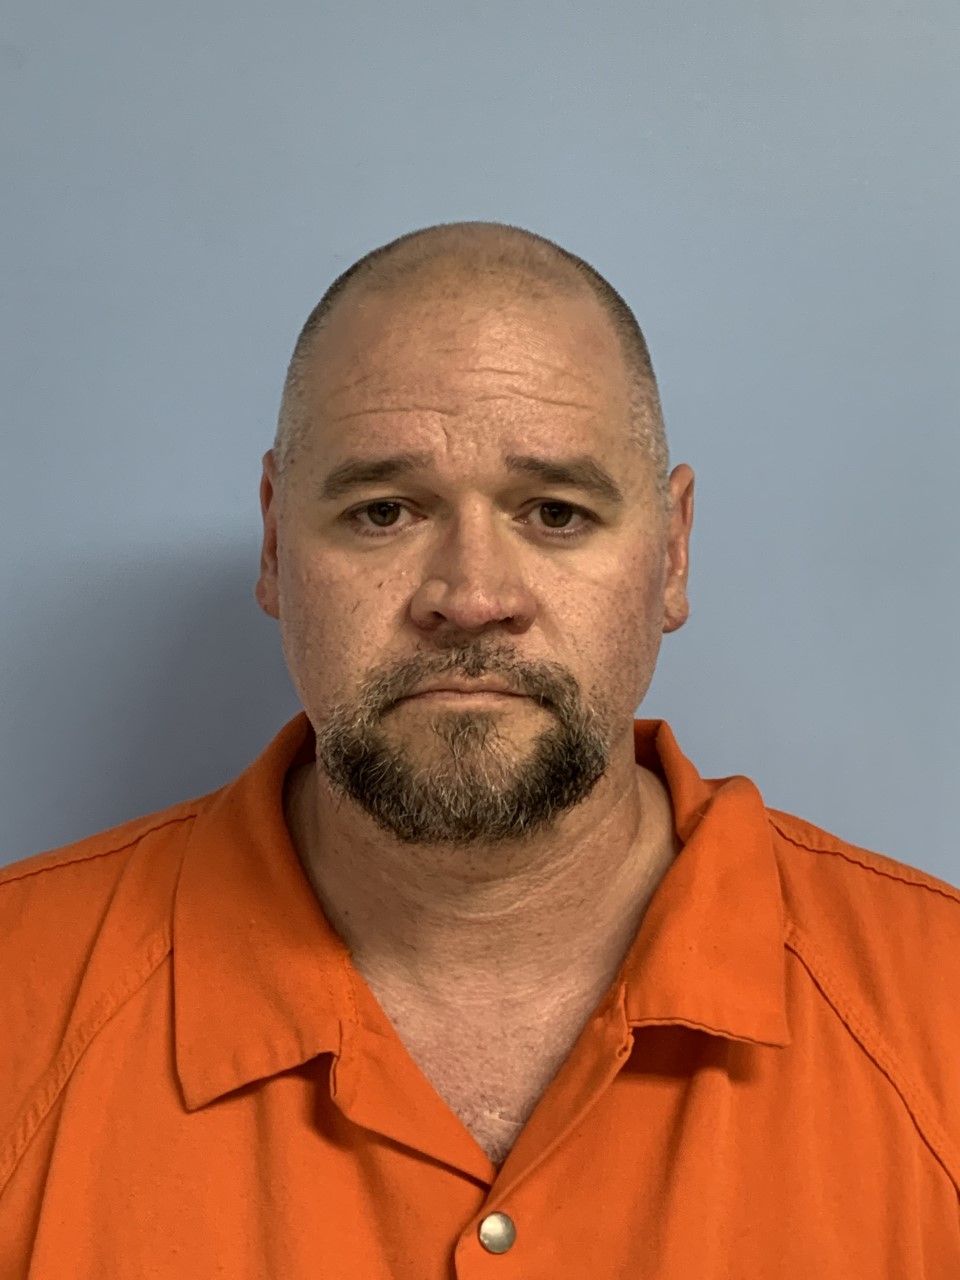 DEFUNIAK SPRINGS MAN ARRESTED ON 200 COUNTS OF CHILD PORNOGRAPHY